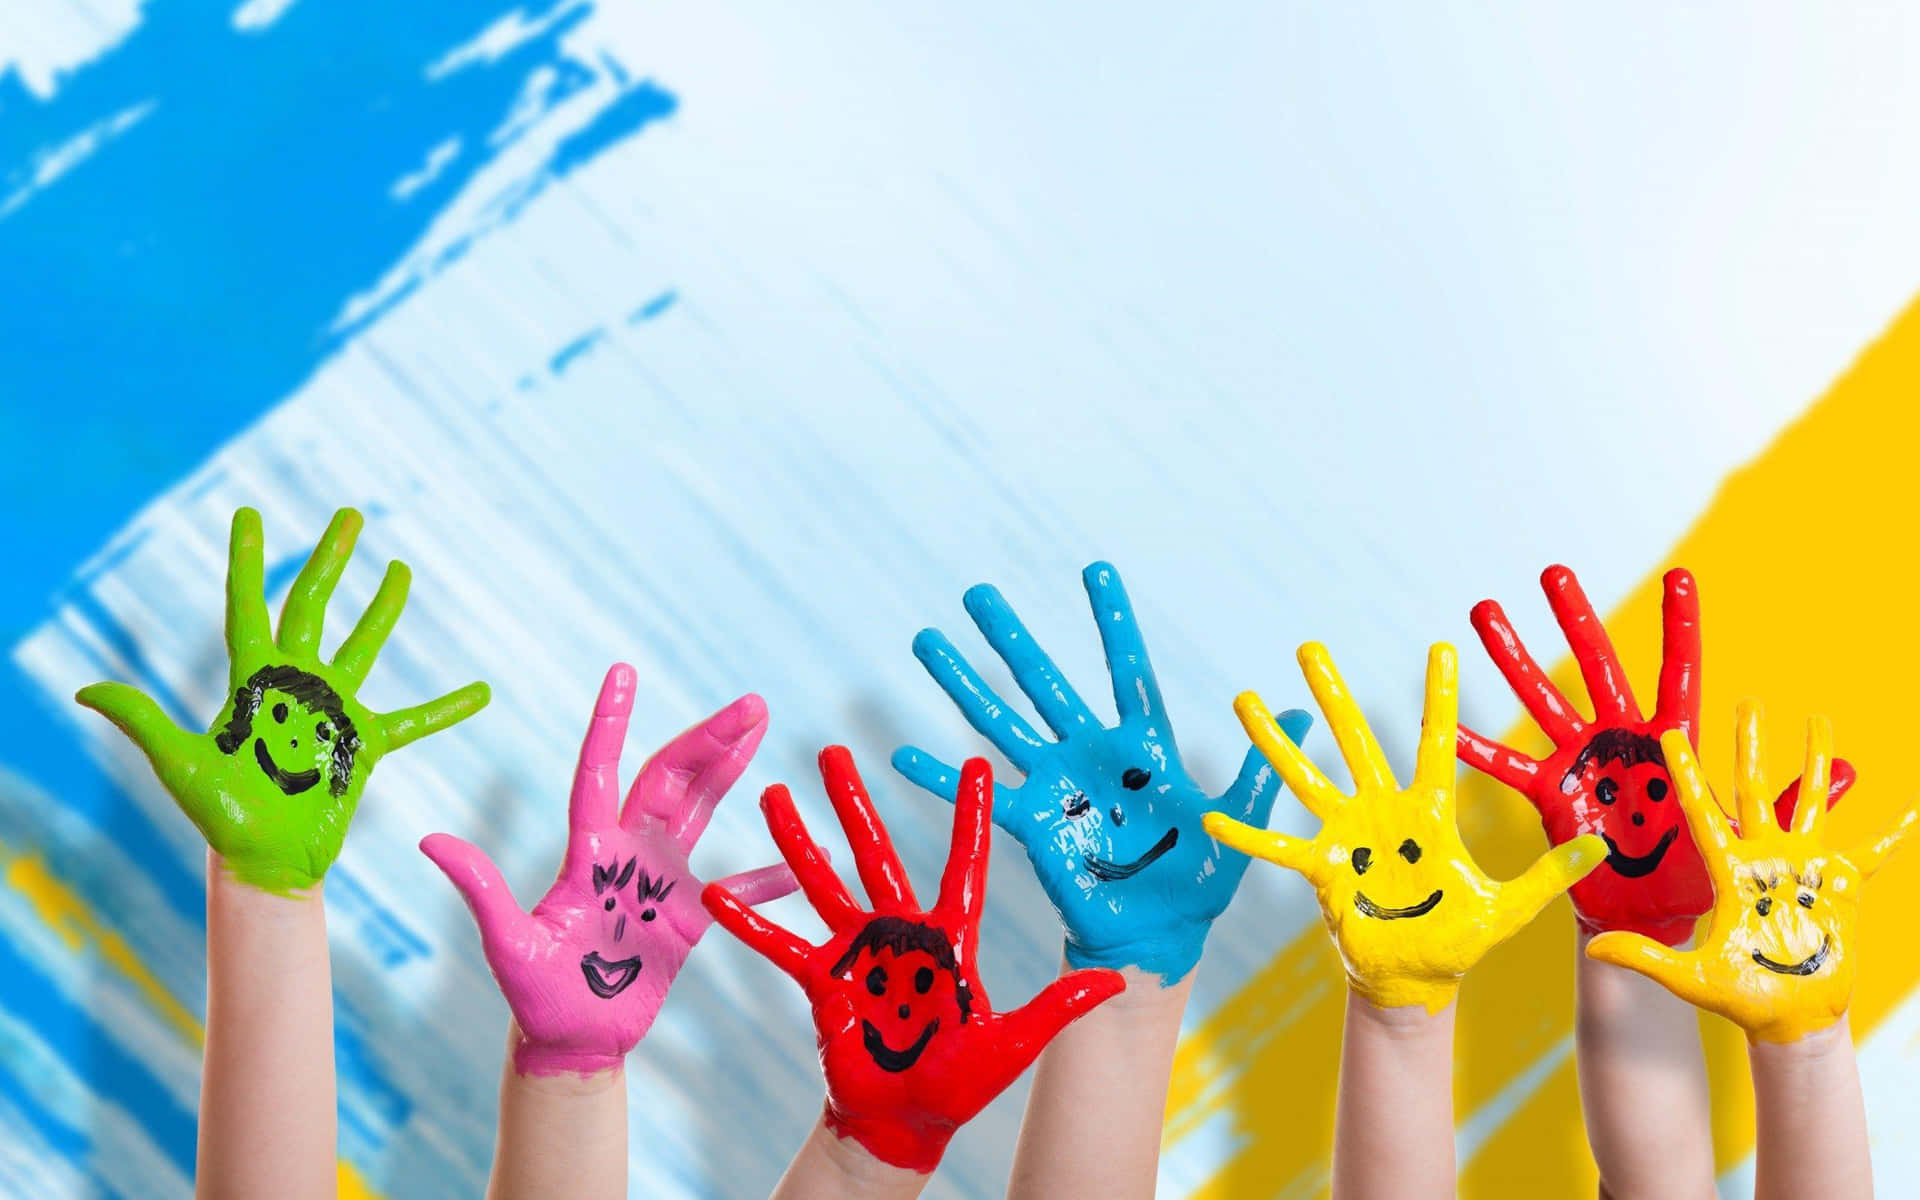 Children's Hands Painted With Smiley Faces